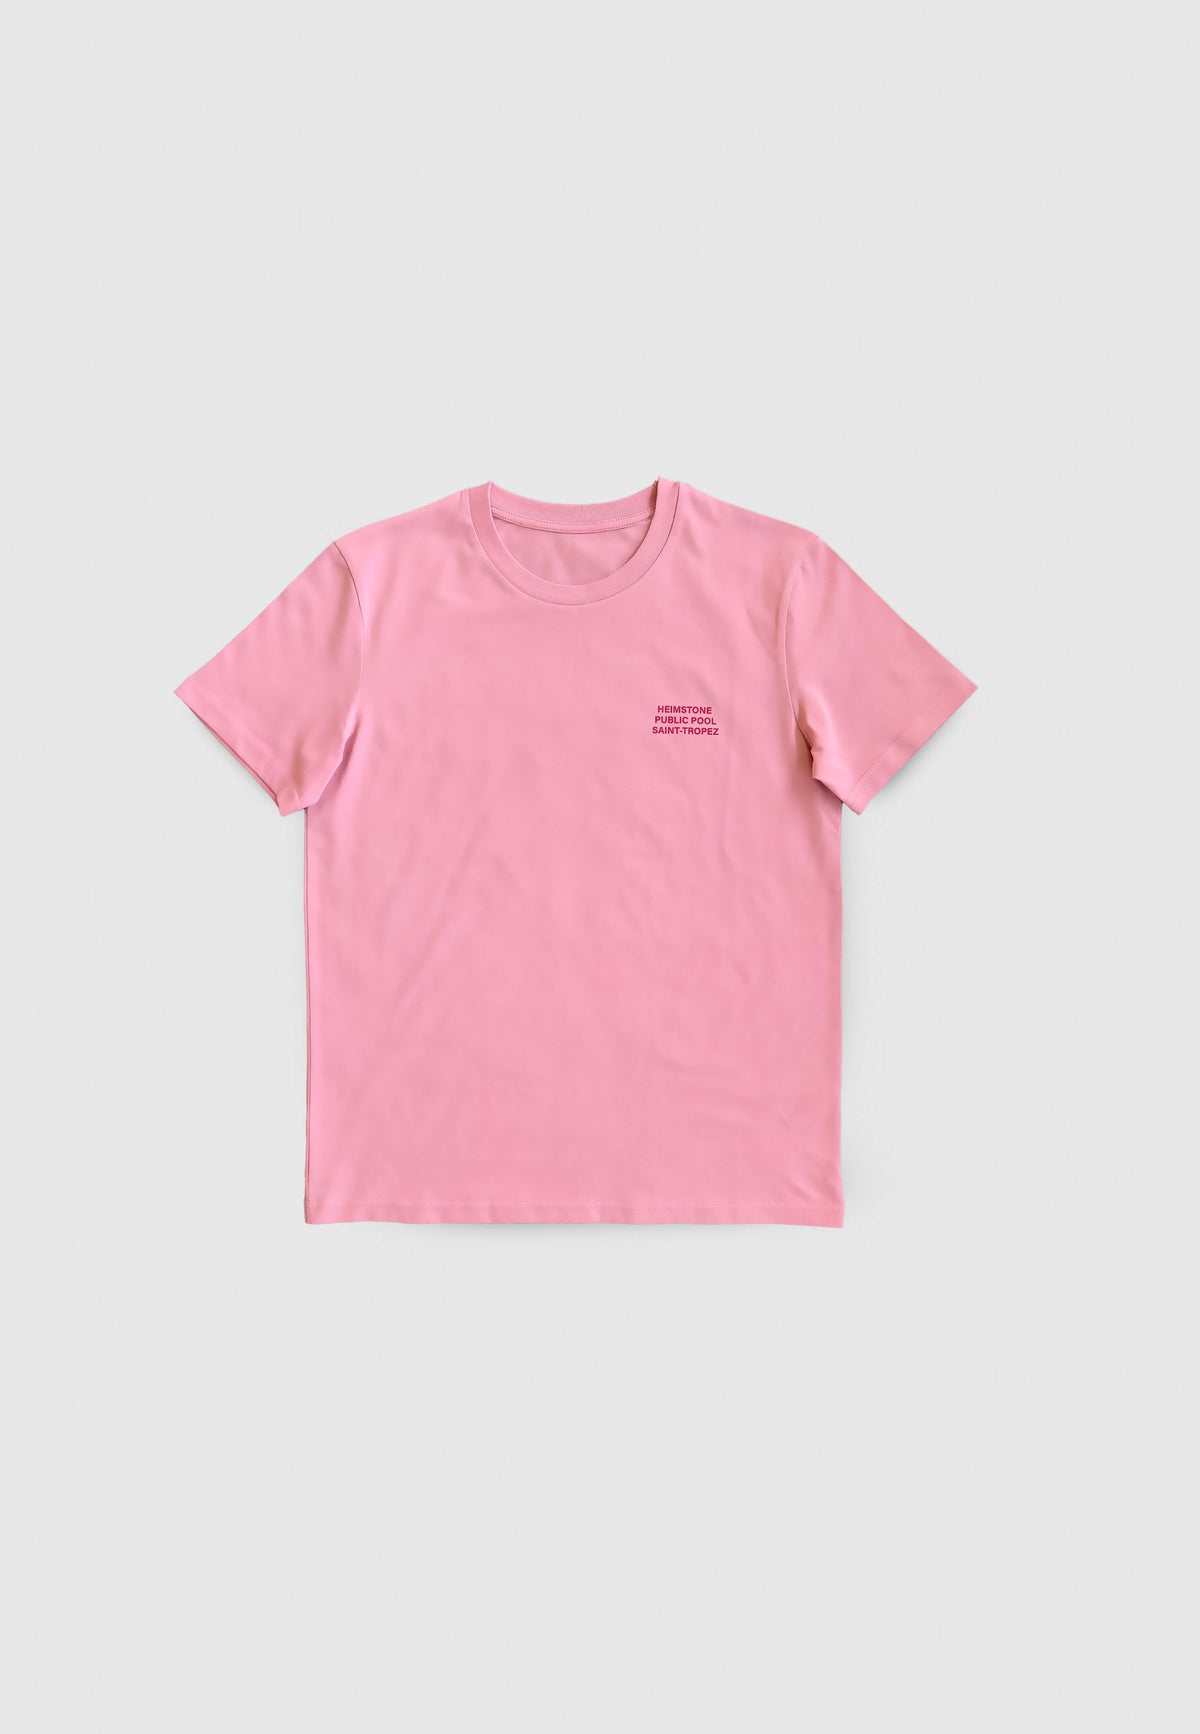 T-shirt in pink cotton